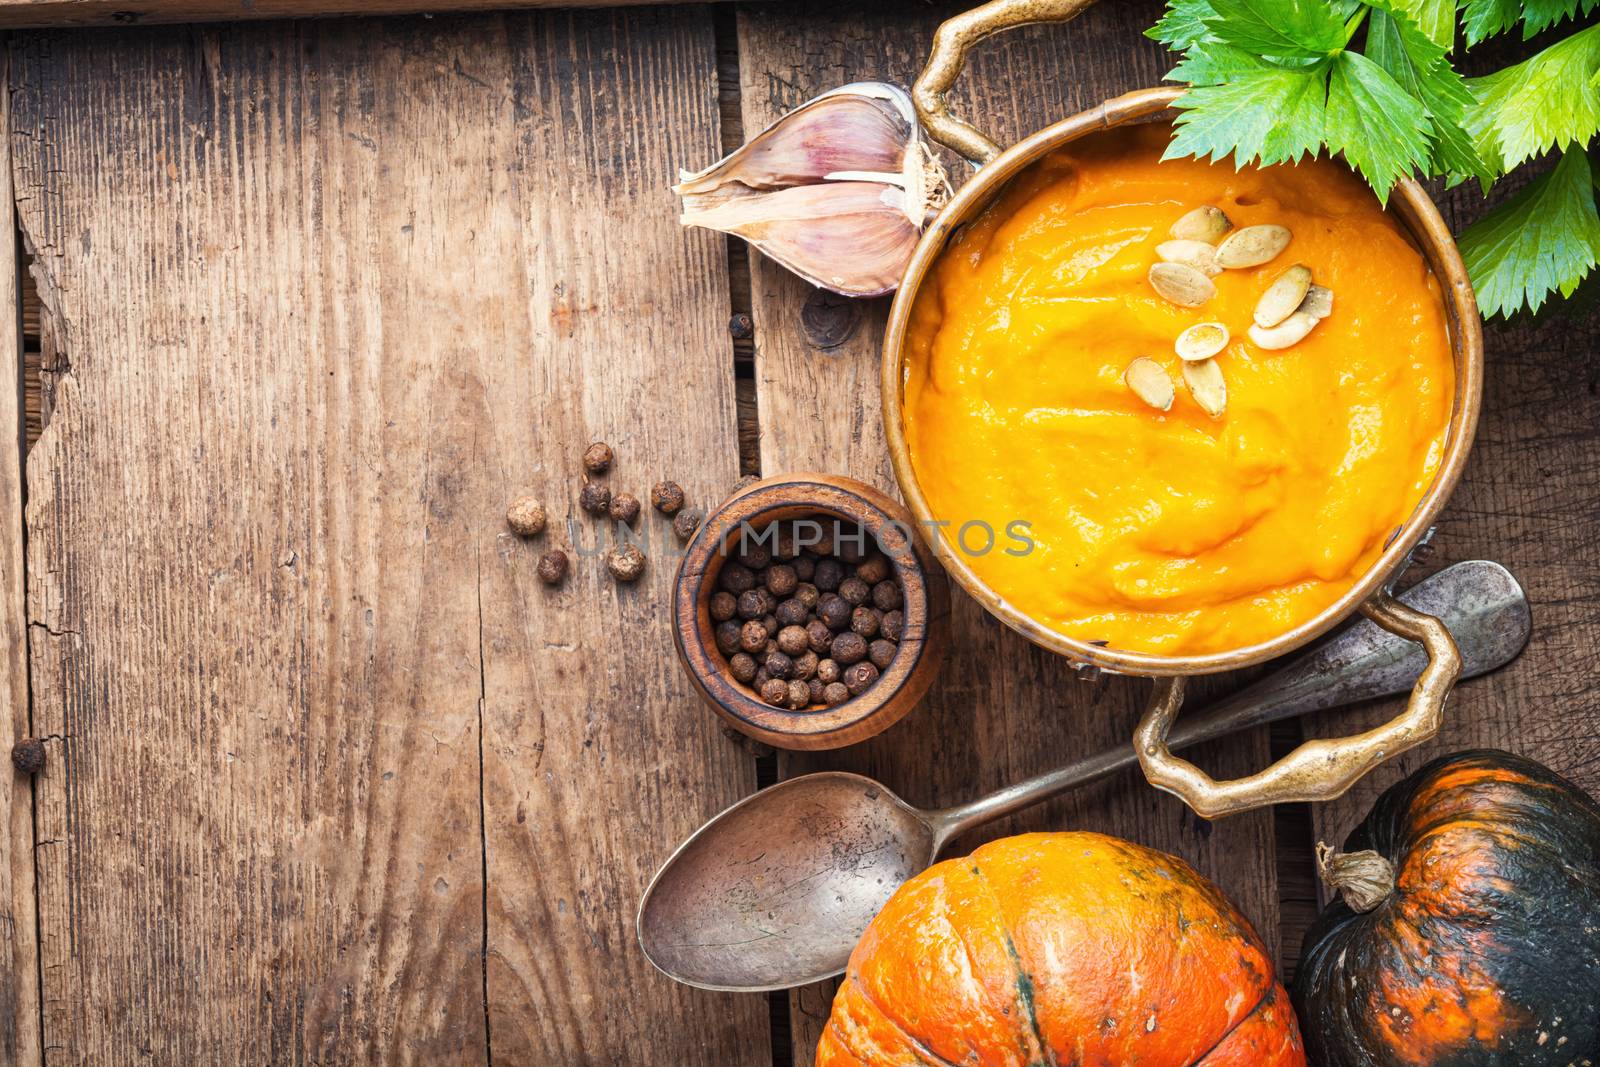 Pumpkin soup on rustic wooden background.Homemade pumpkin soup with spices